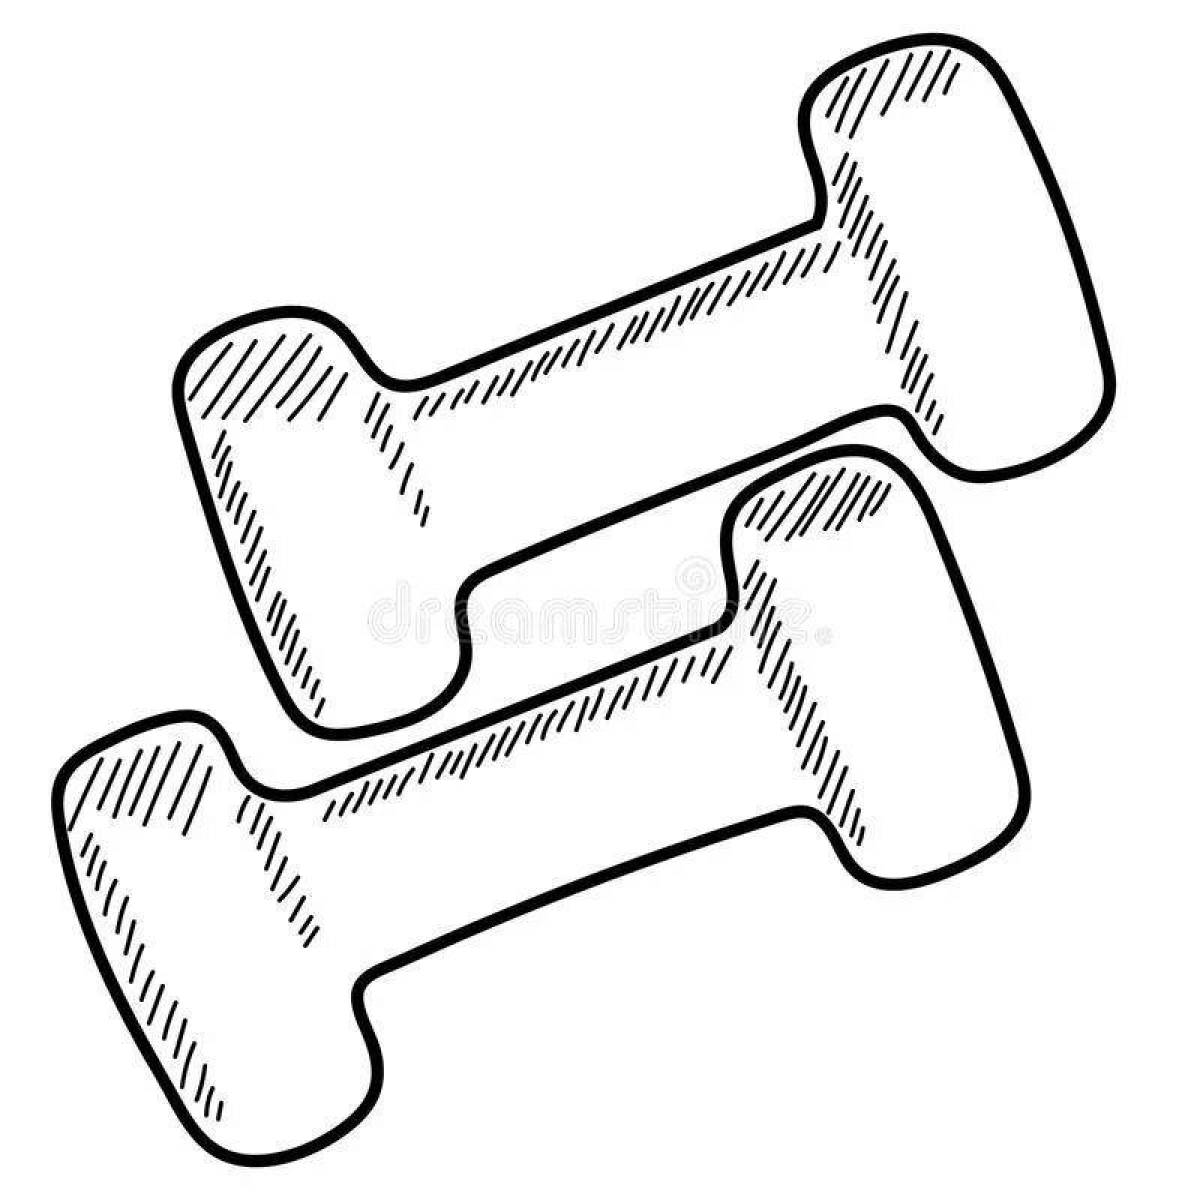 Adorable dumbbell coloring page